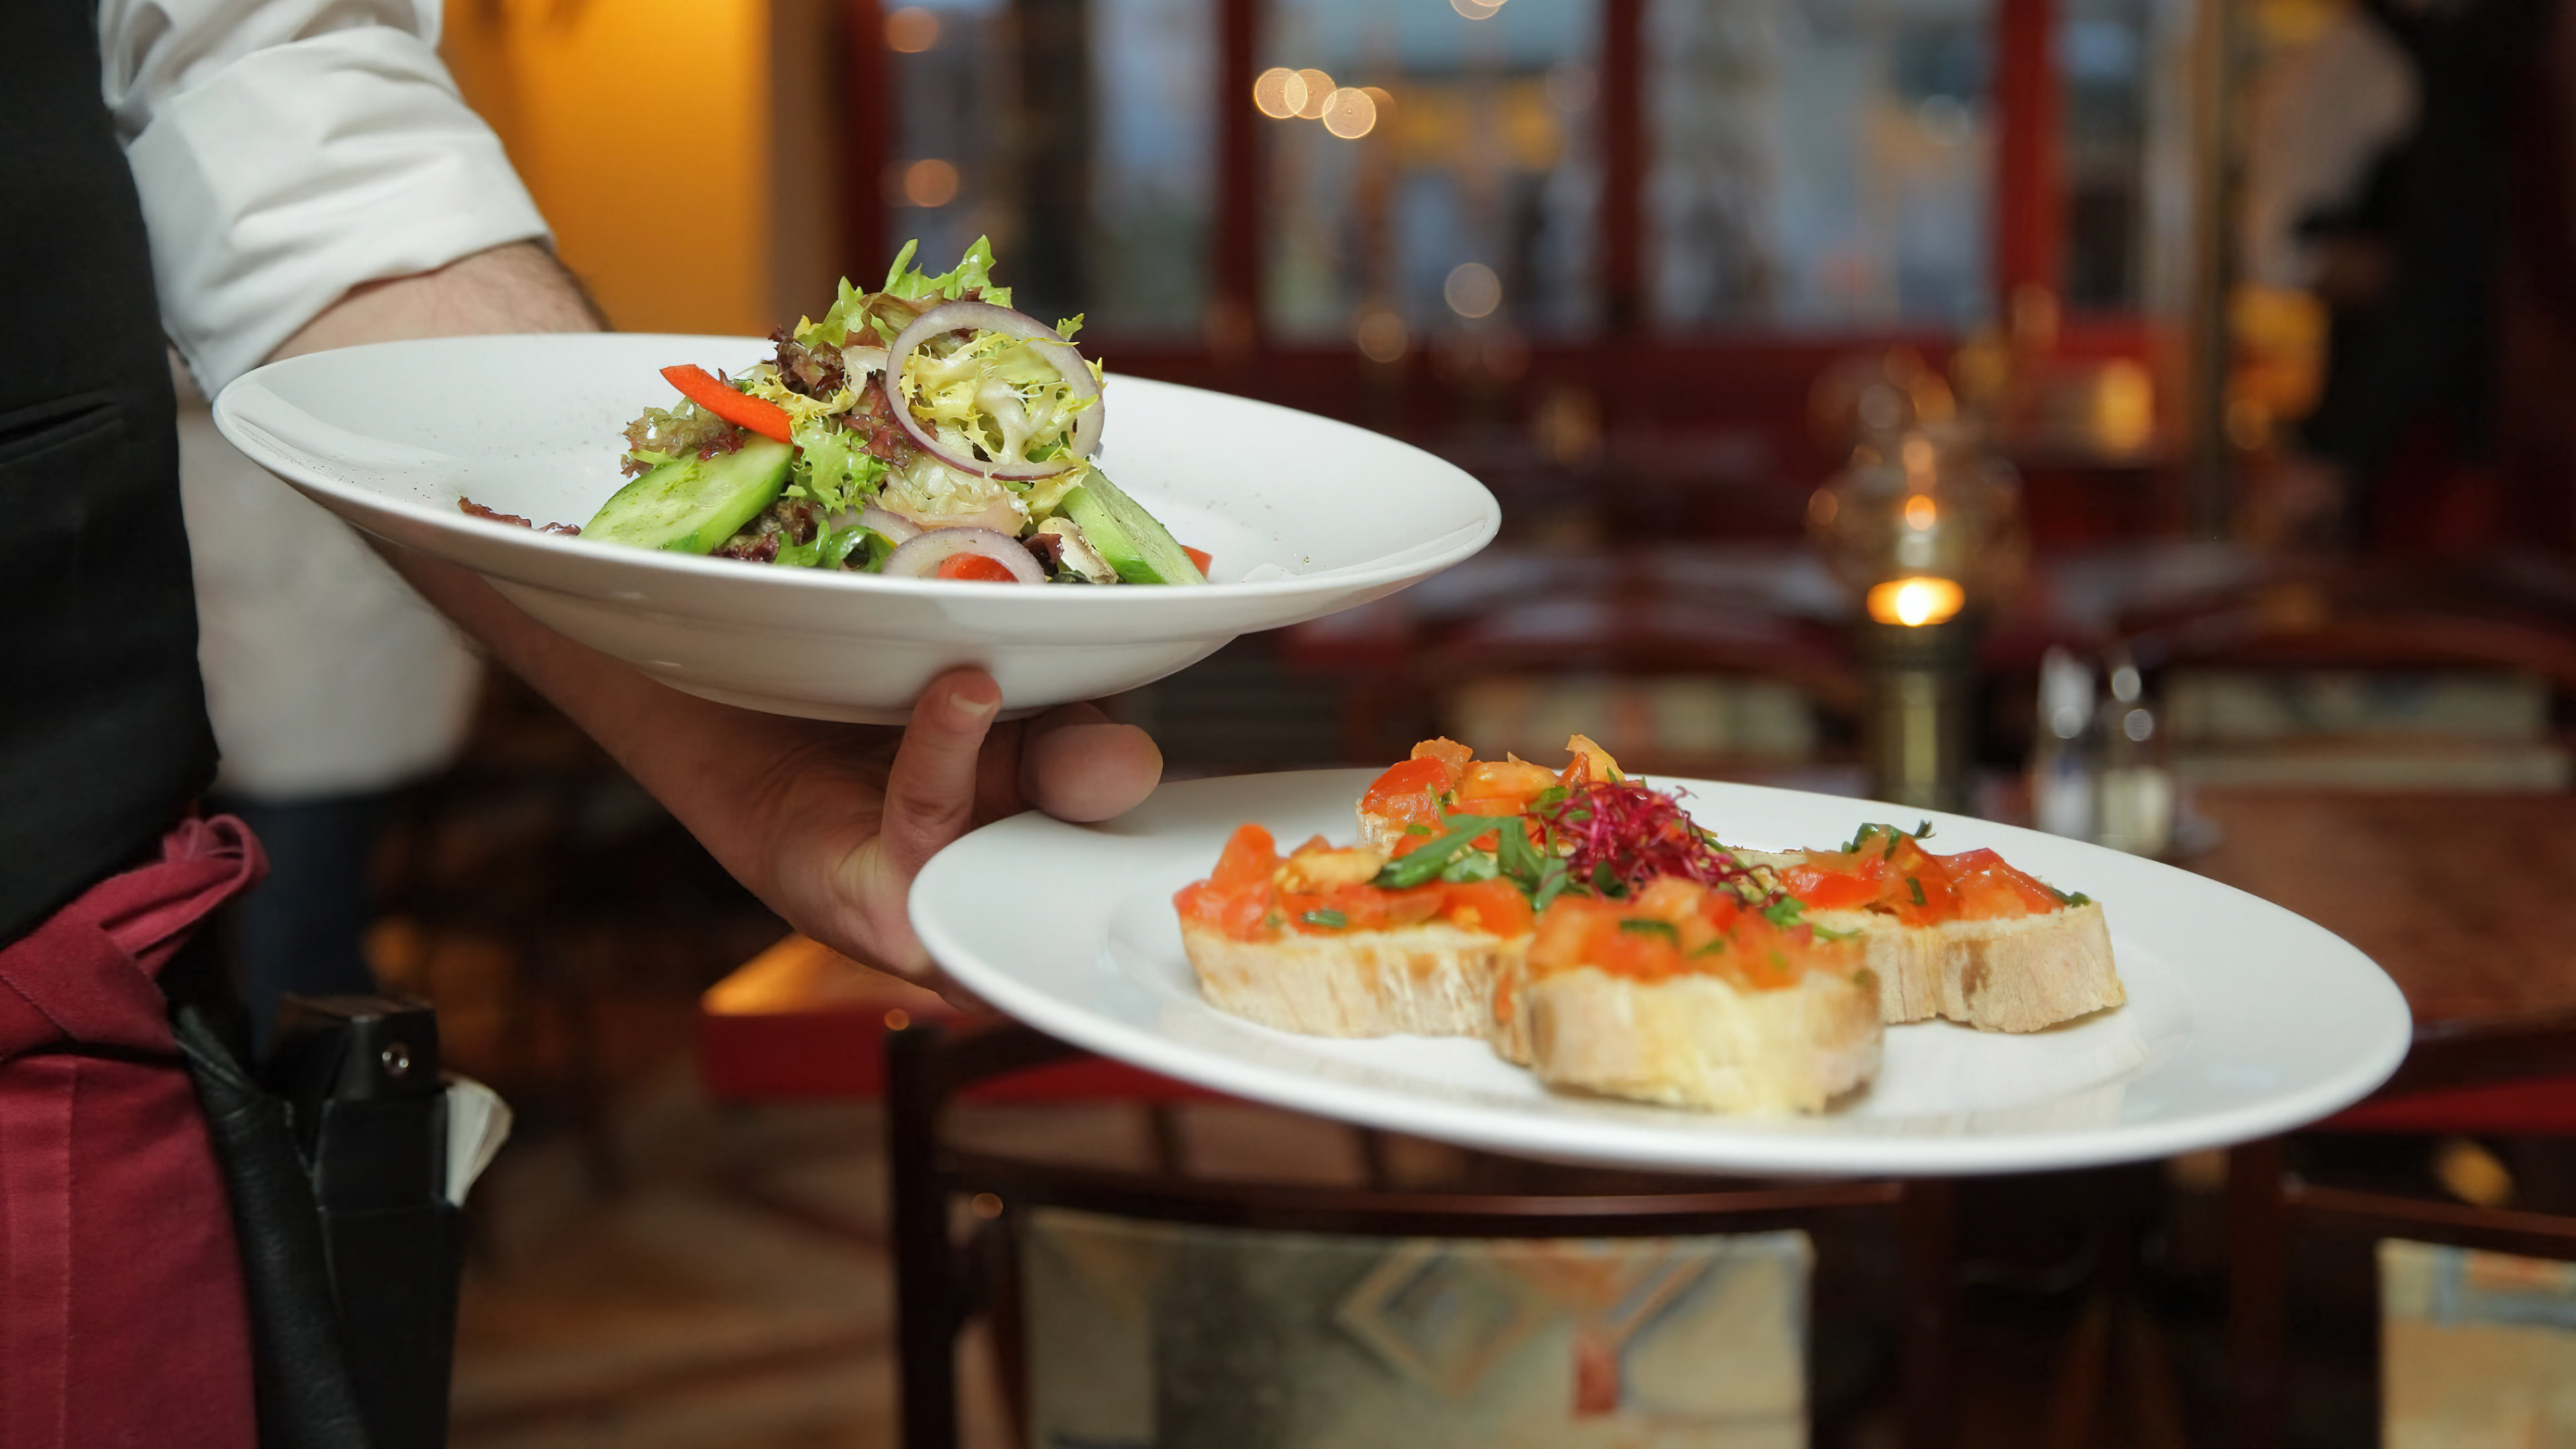 Bord with four delicious appetizers, which are served at a table at the Cantarel